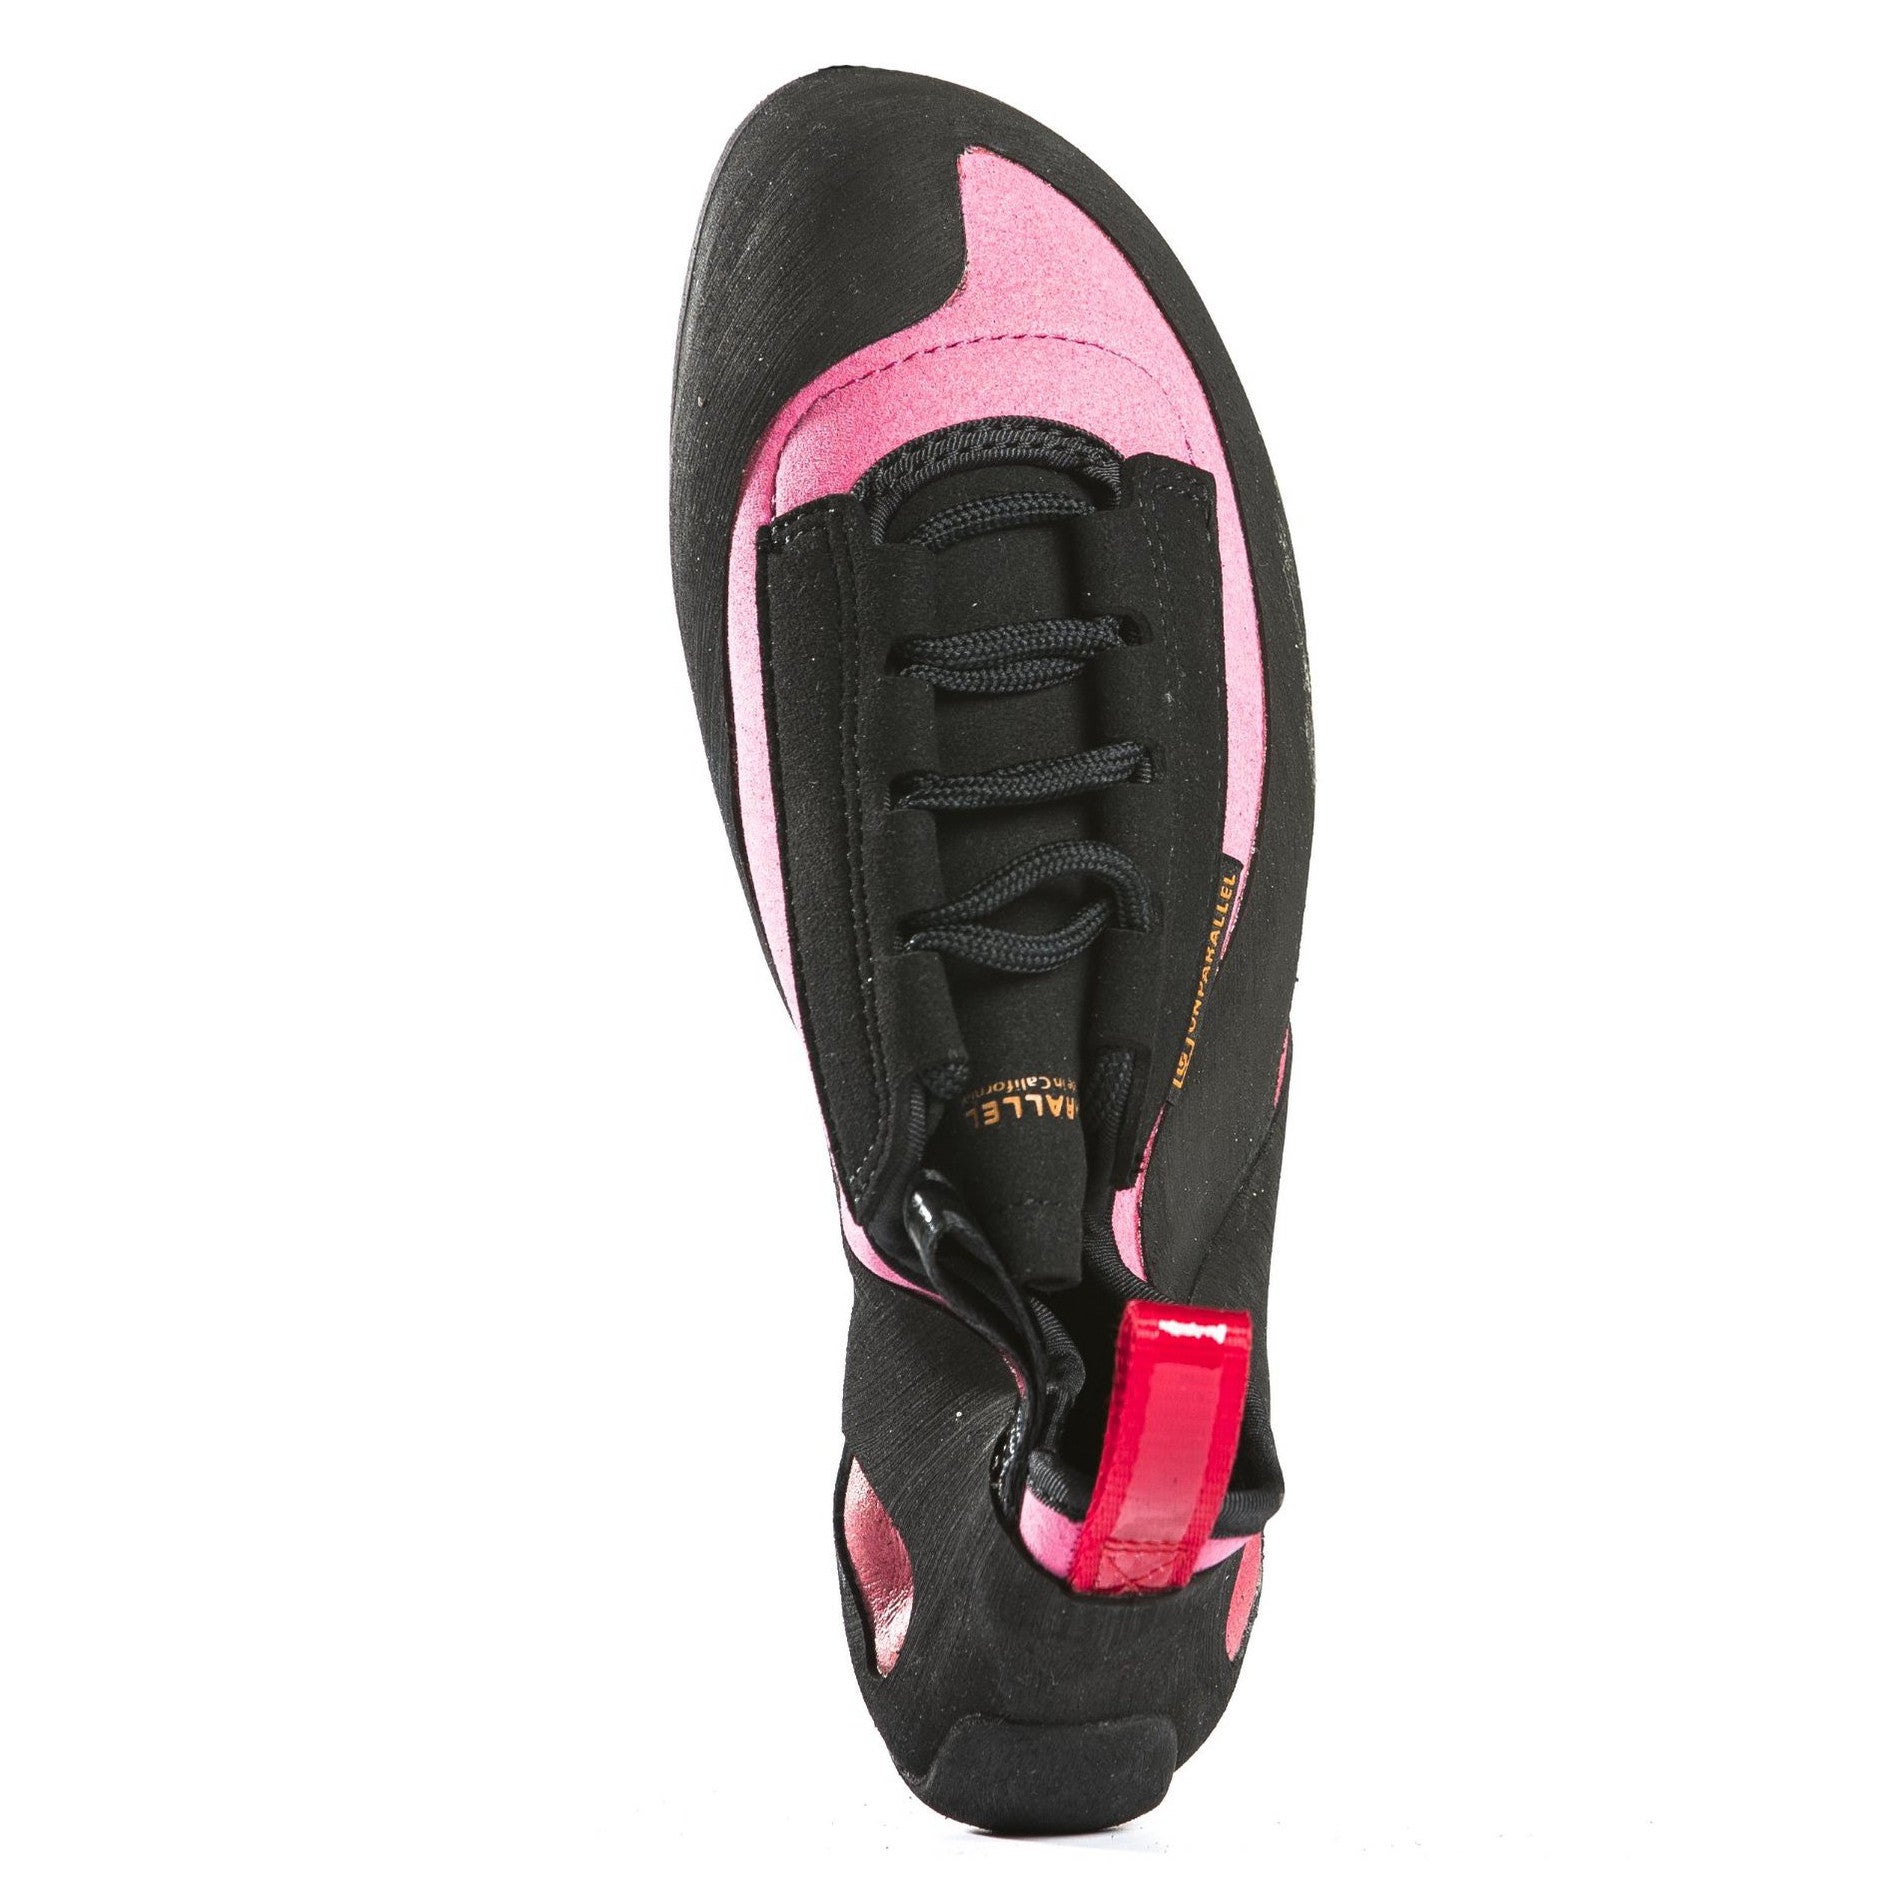 Unparallel Up Lace LV climbing shoe in pink showing the lace up closure and rear pull tab